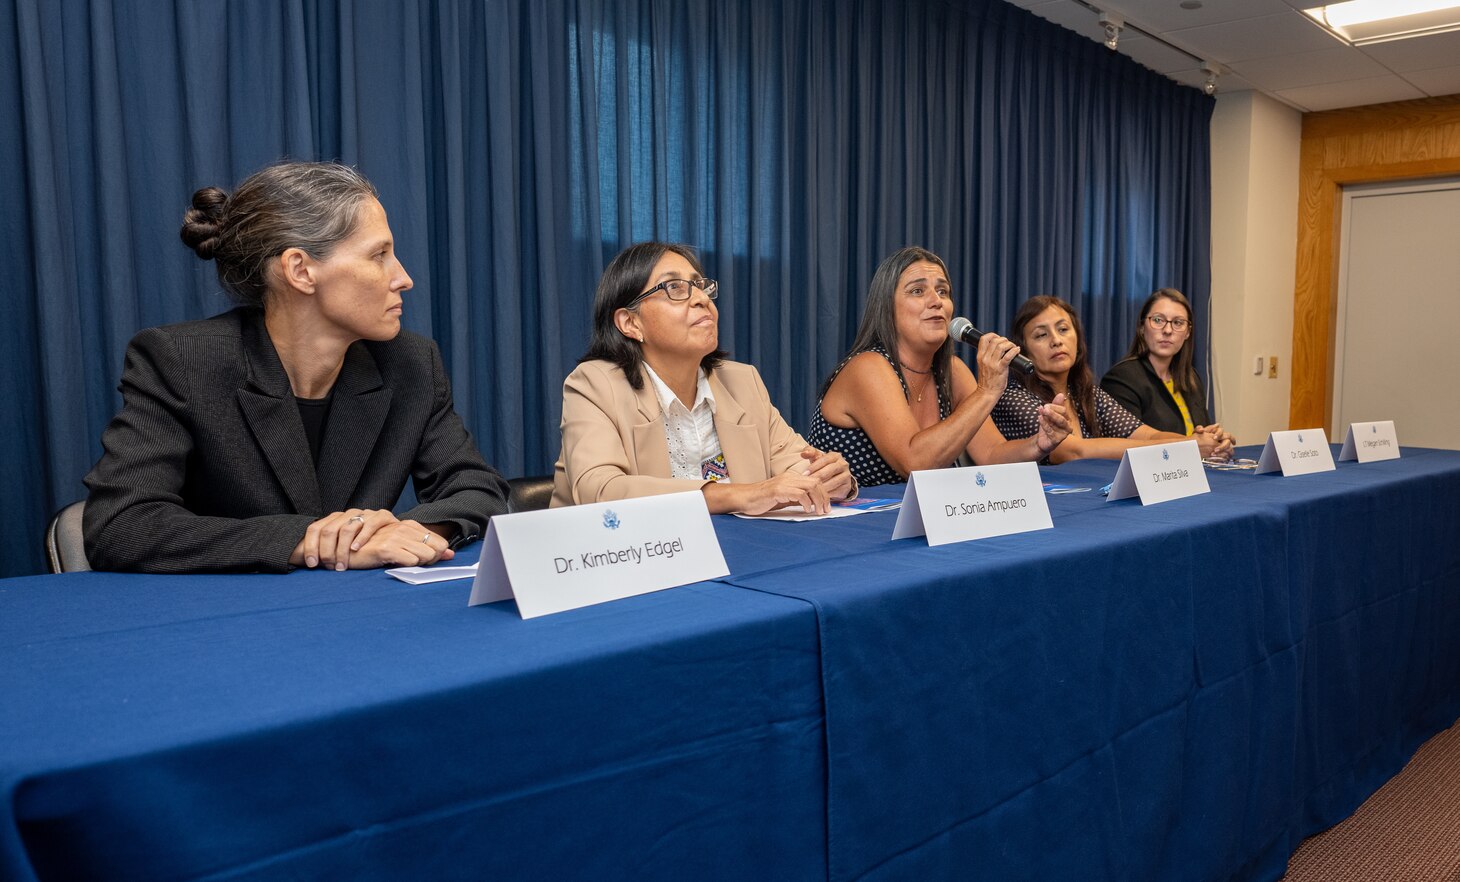 LIMA, Peru (March 20, 2024) Cmdr. Kimberly Edgel, Dr. Sonia Ampuero, Dr. Maria Silva, Dr. Giselle Soto and Lt. Megan Schilling, with Naval Medical Research Unit (NAMRU) SOUTH discuss their careers in STEM as part of a “Women in Sciences” panel during Women’s History Month. NAMRU SOUTH, part of the Navy Medicine Research & Development enterprise, conducts research on a wide range of infectious diseases of military and public health significance, and supports Global Health Engagement through surveillance of those diseases, including dengue fever, malaria, diarrheal diseases and sexually transmitted infections. (Courtesy Photo by Brenda Pomar/ Released)